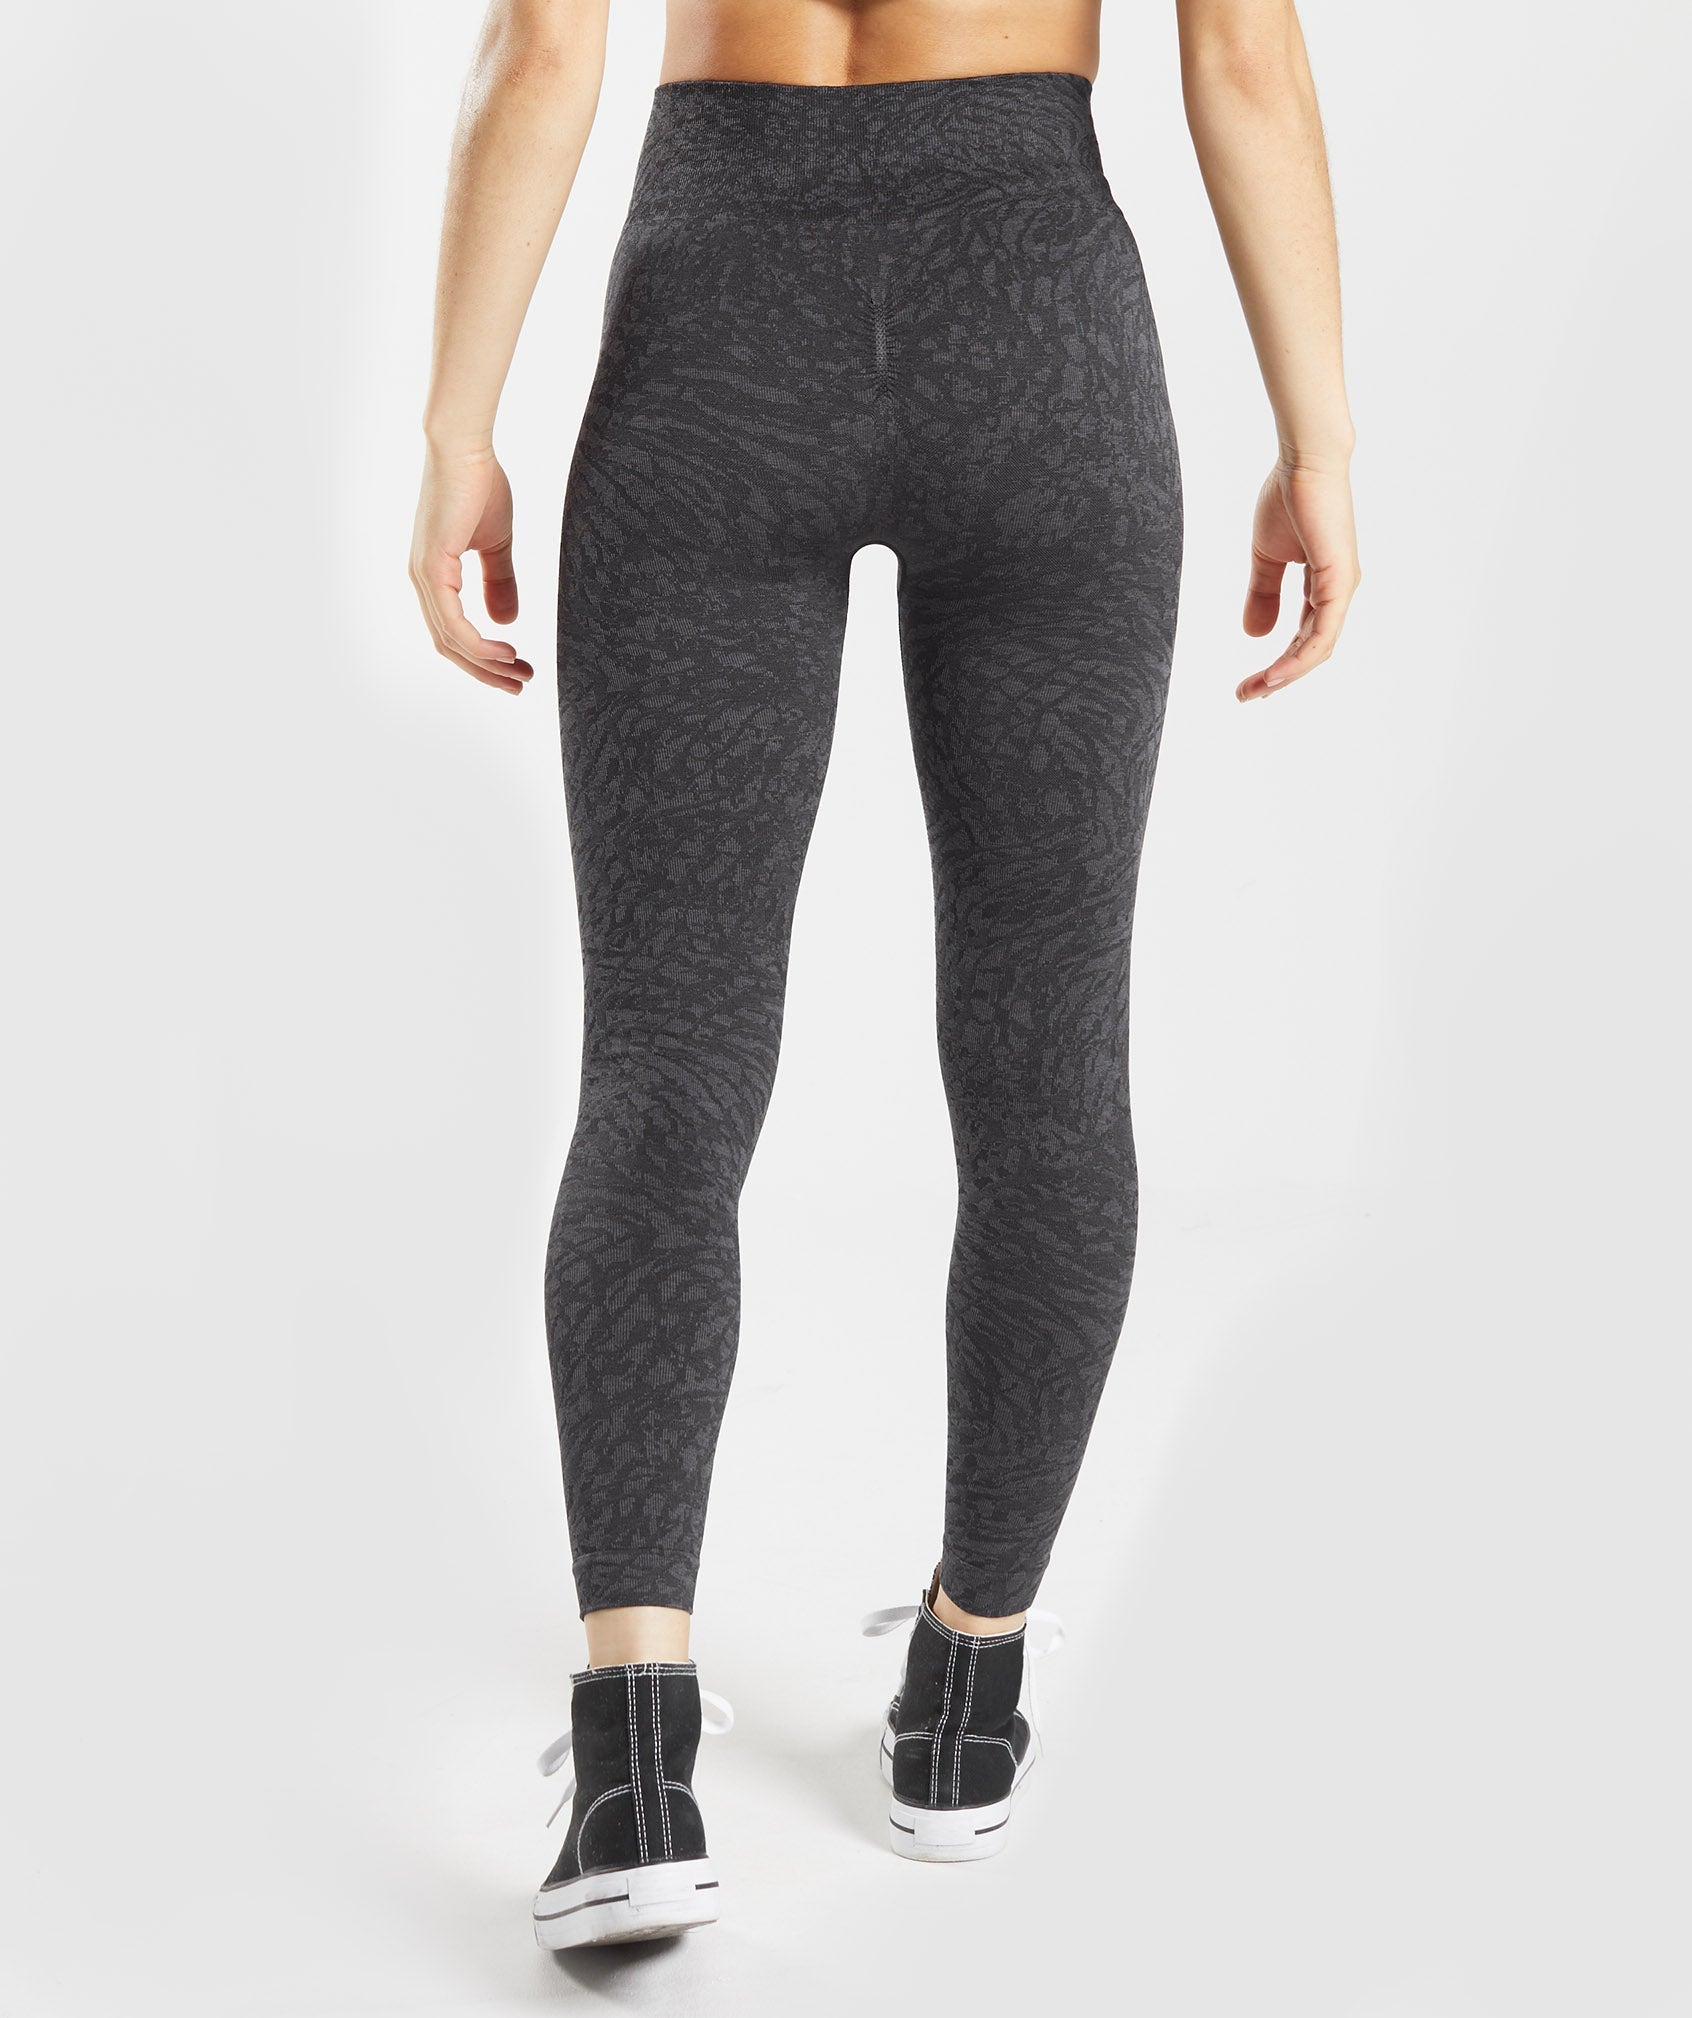 Black and Grey Leopard Leggings — Simply Madd